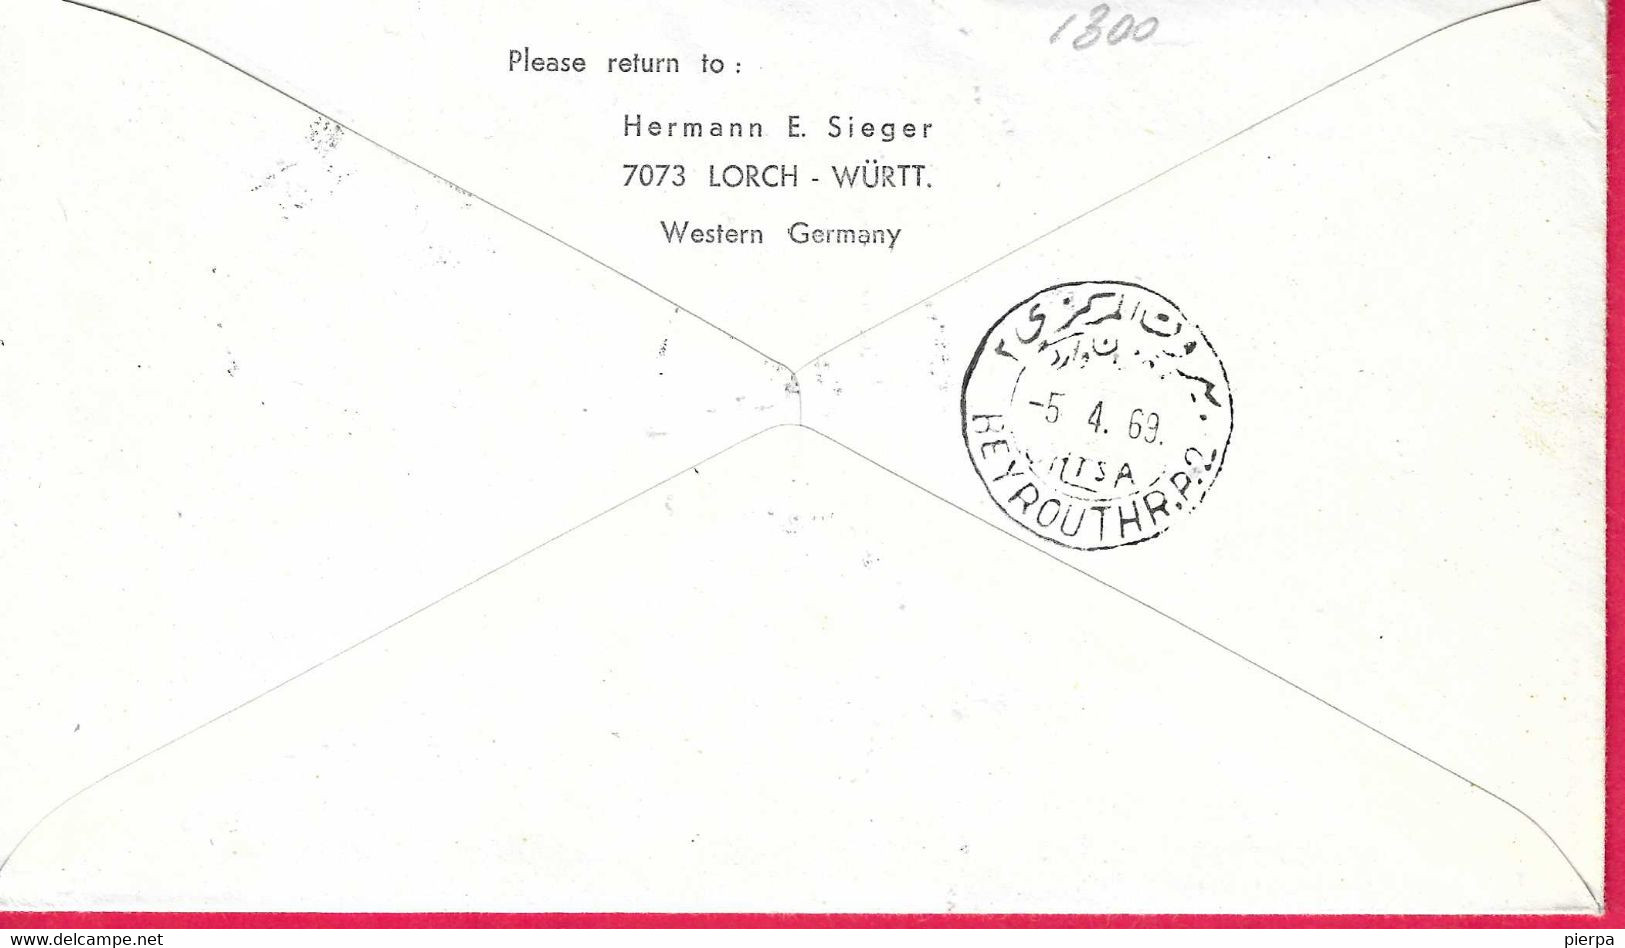 TURCHIA - FIRST FLIGHT BOING JET FROM ISTANBUL TO BEIRUT * 4.4.69* ON OFFICIAL REGISTERED ENVELOPE - Luchtpost